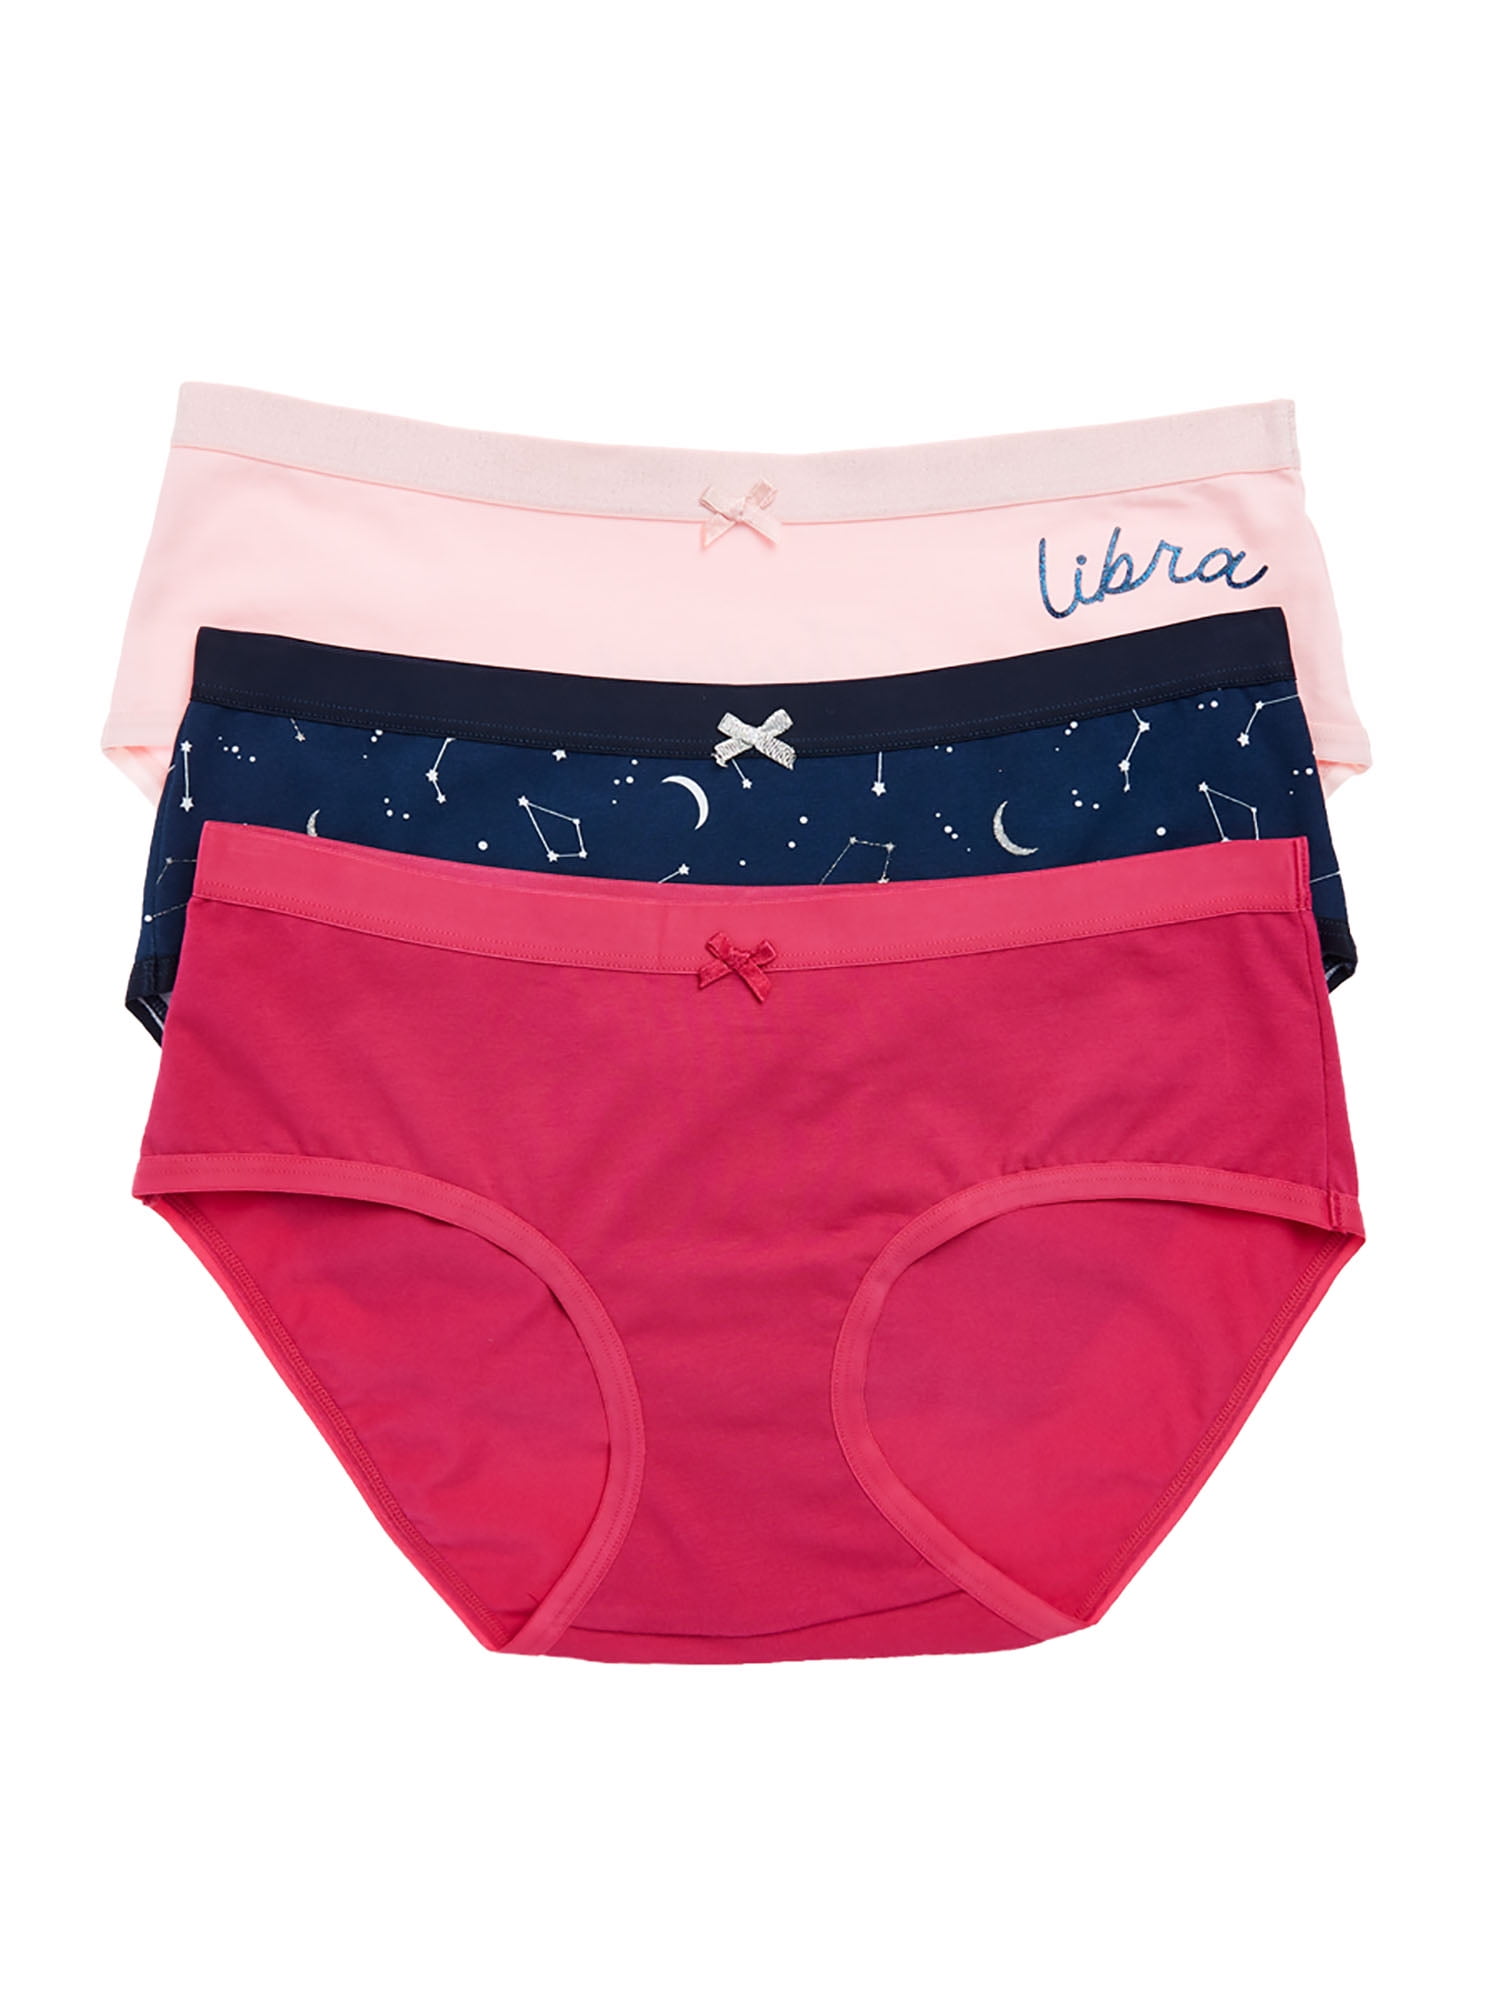 Pisces Have More Fun Astrology Zodiac Sign Funny Womens Boyshort Underwear Panties 